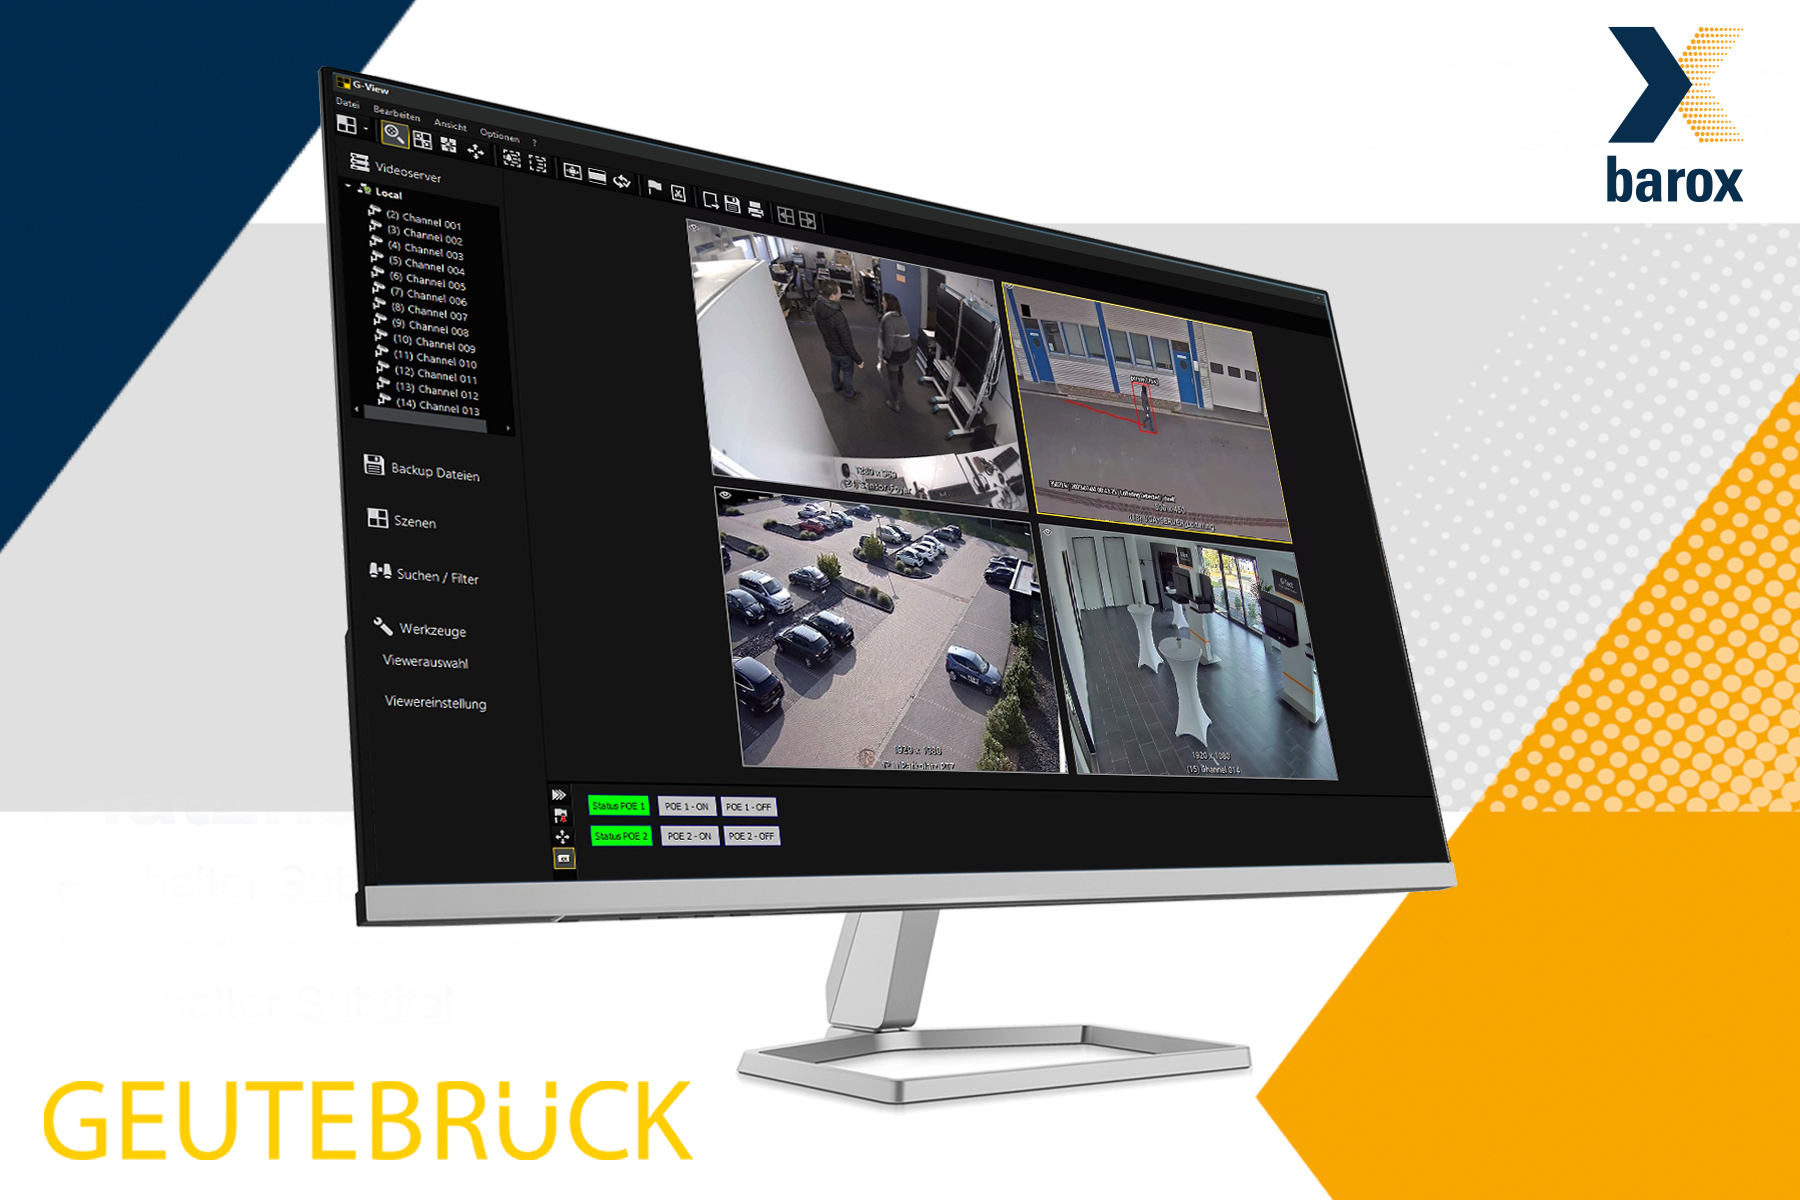 barox provides added value for IP video networks with integration to Geutebrück VMS